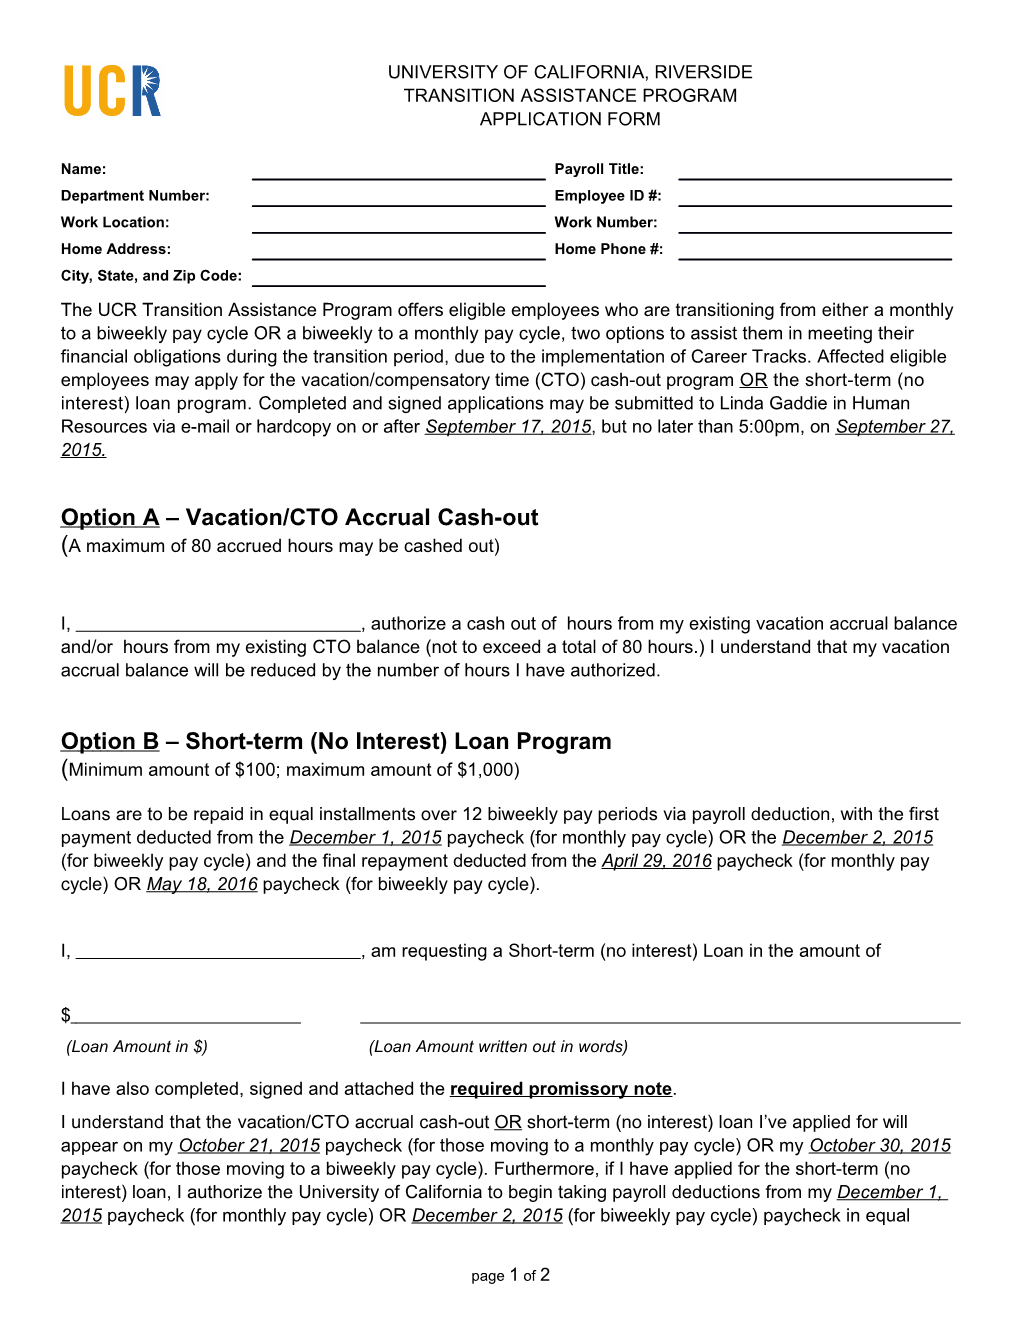 Option a Vacation/CTO Accrual Cash-Out